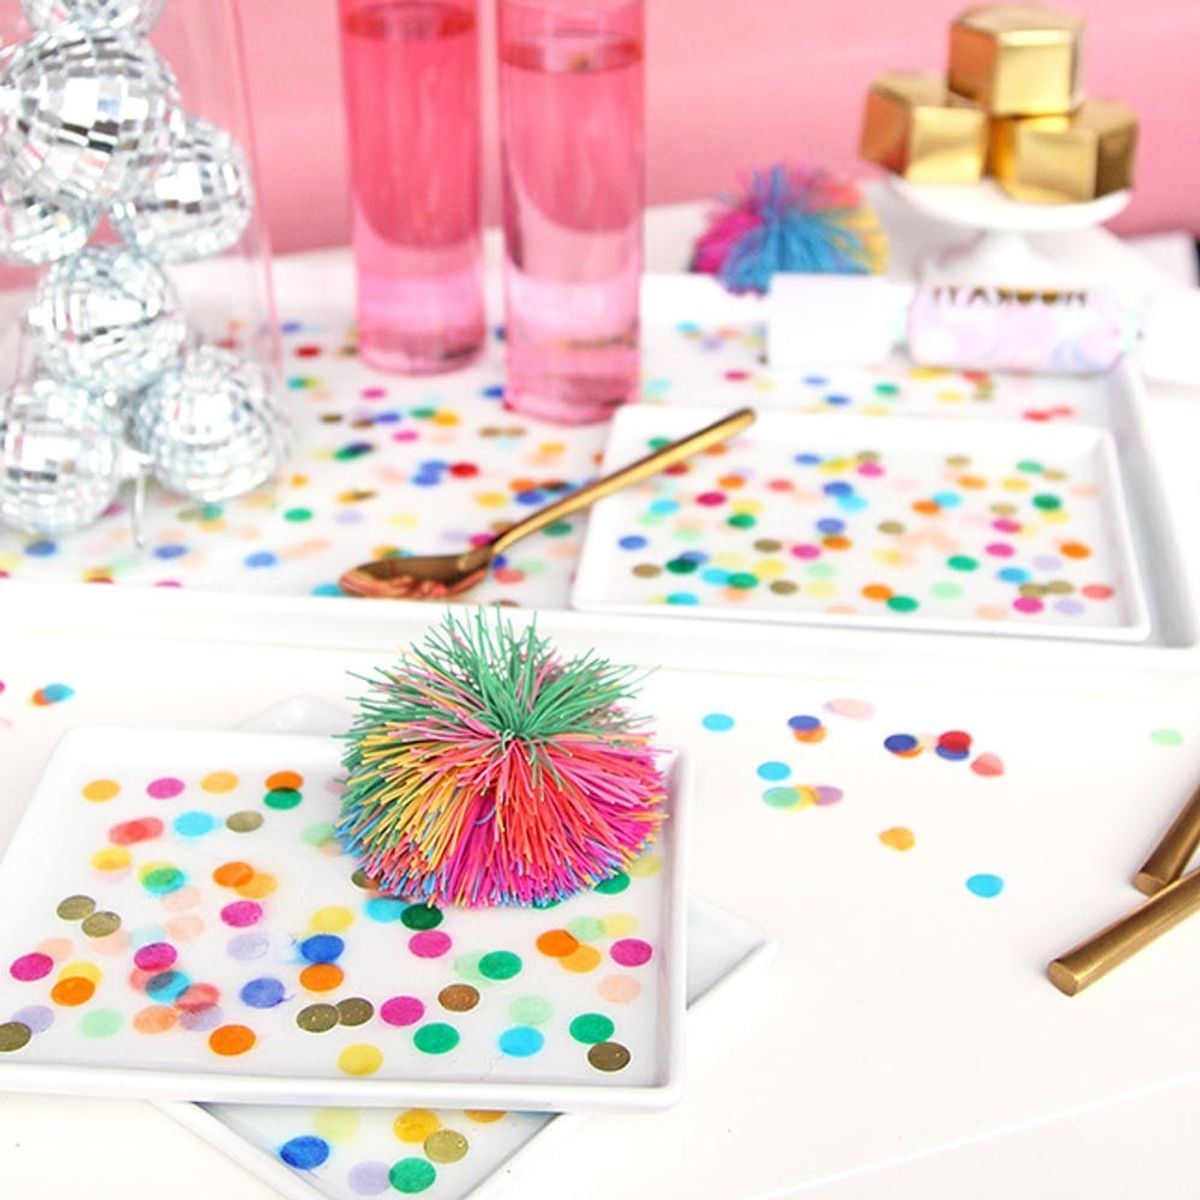 Ring in the New Year With This DIY Confetti Tray